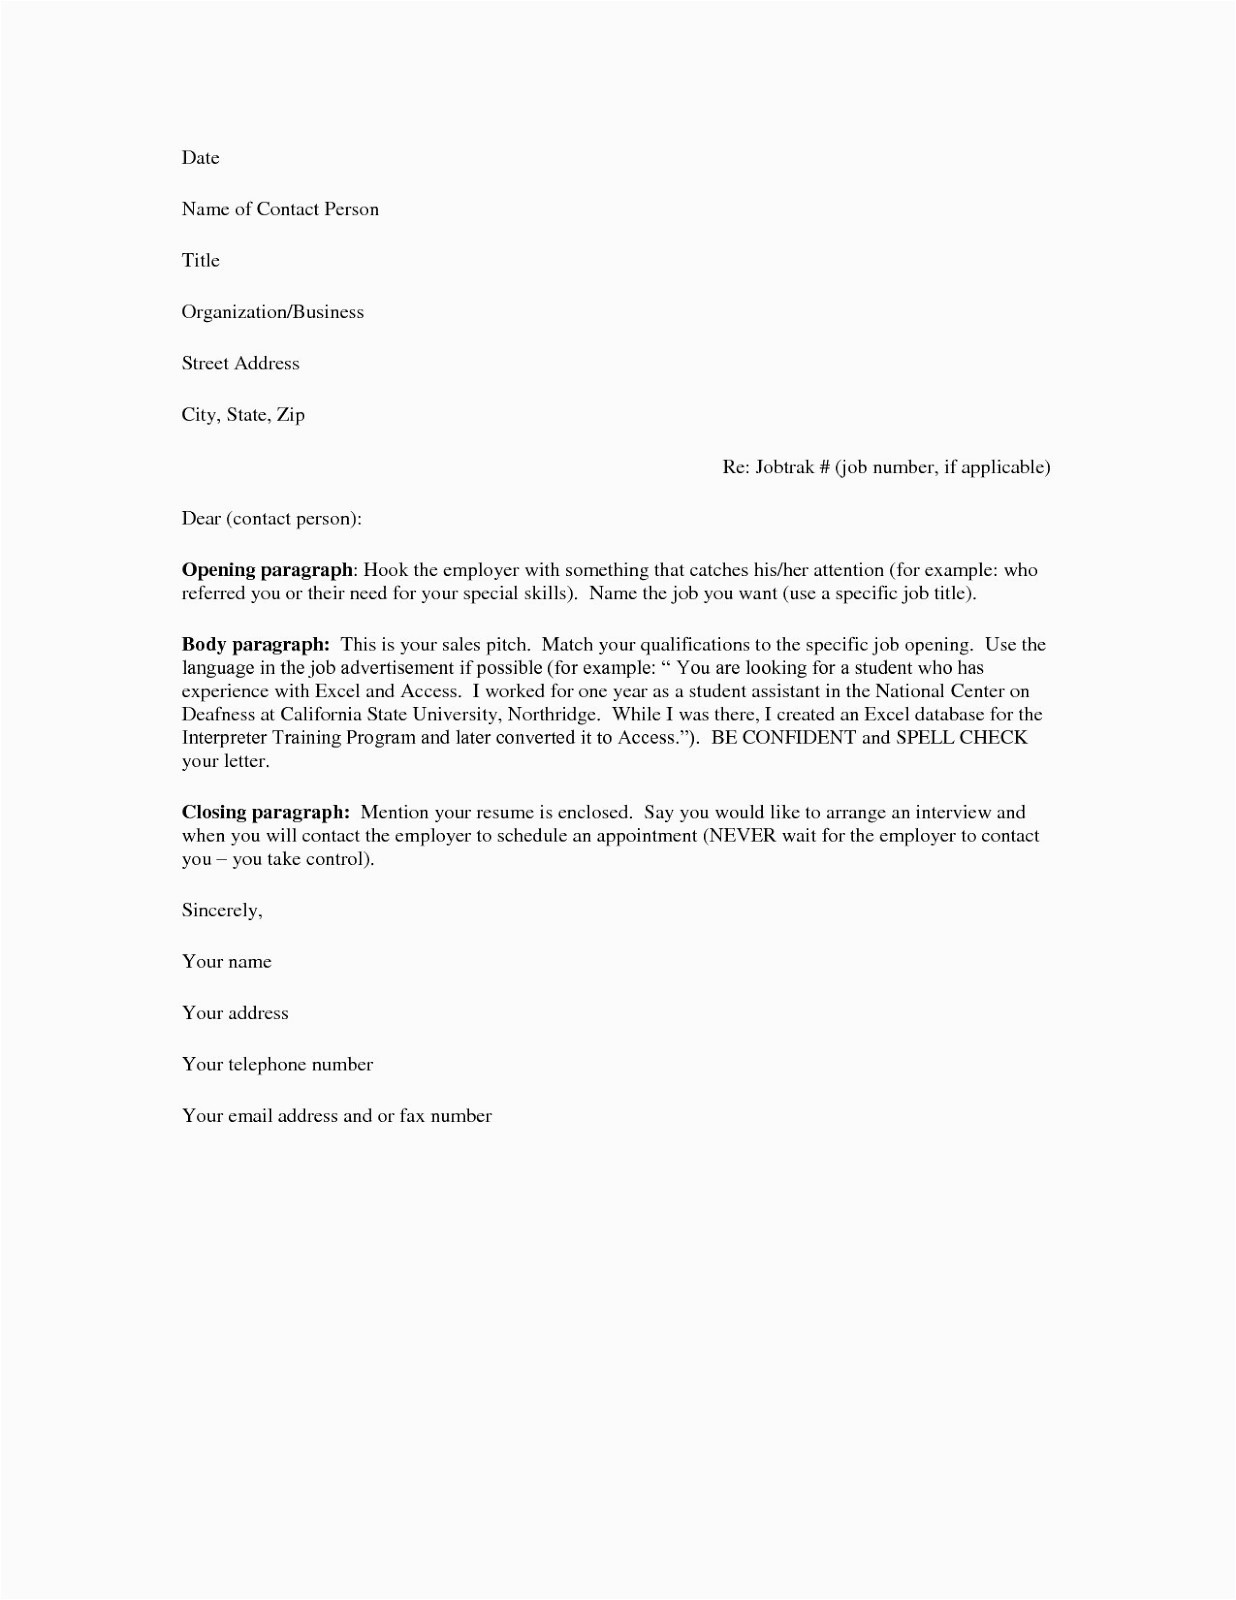 Resume and Cover Letter Samples Free Free Cover Letter Samples for Resumes